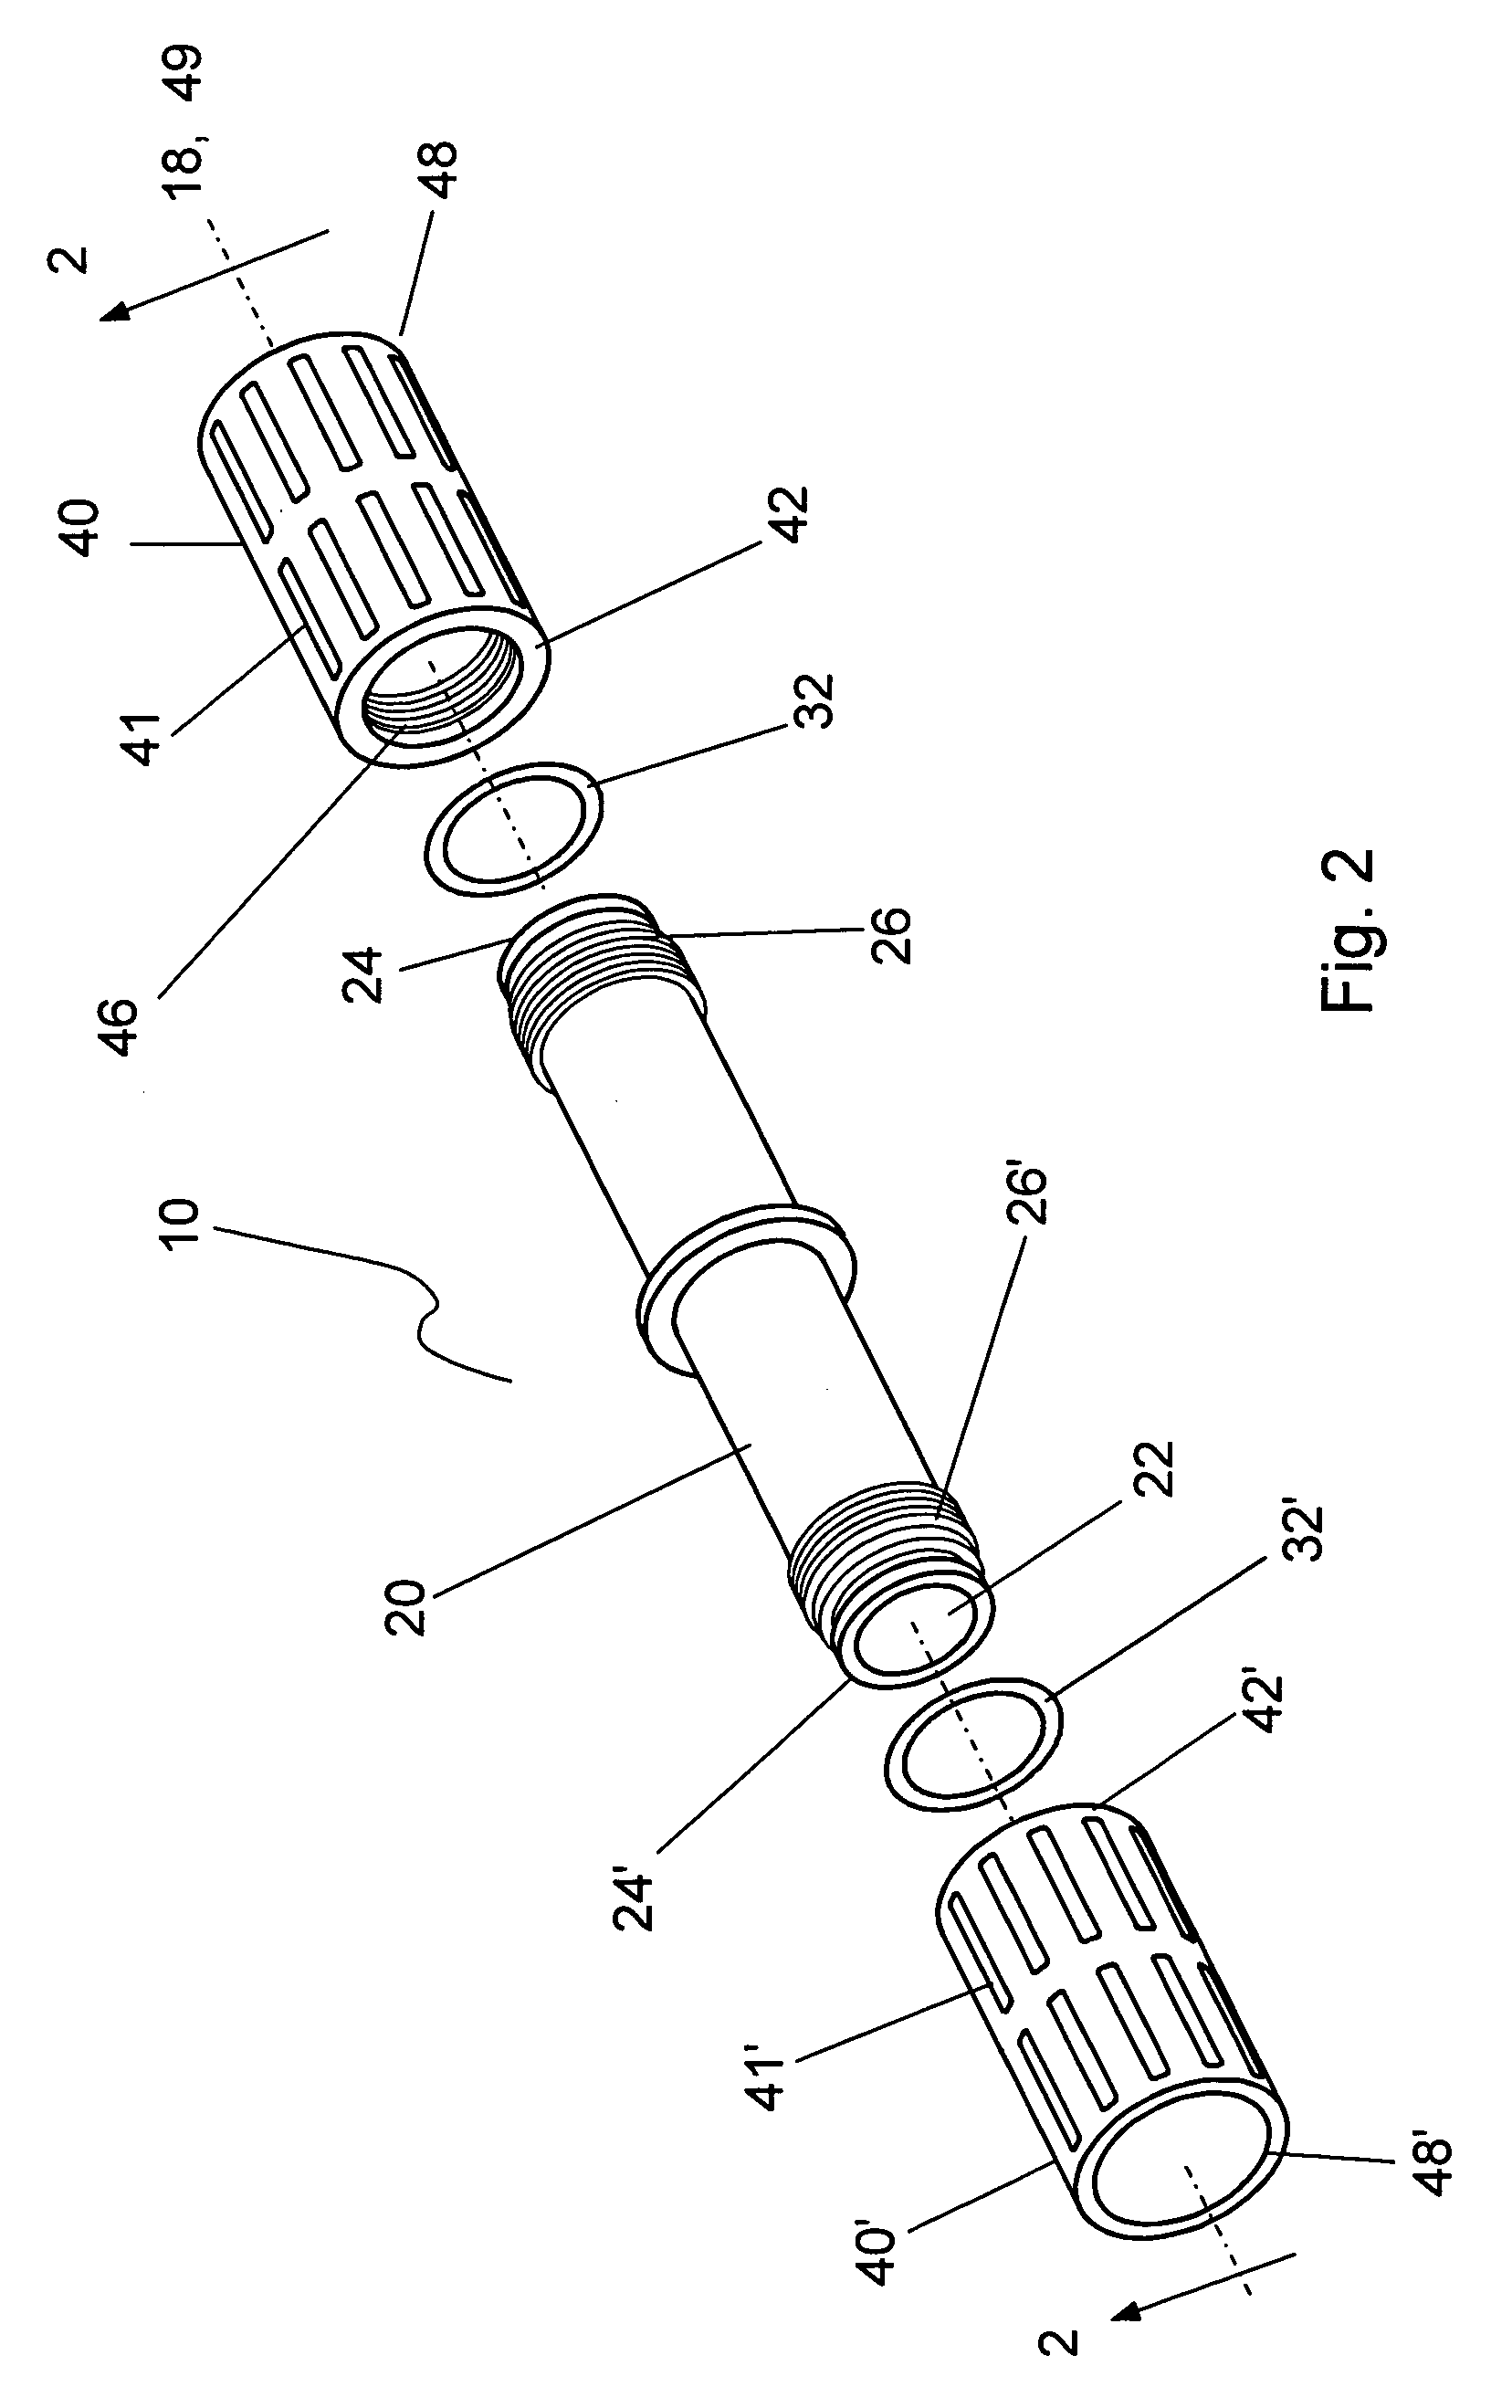 Slide coupling fitting for connecting conduits